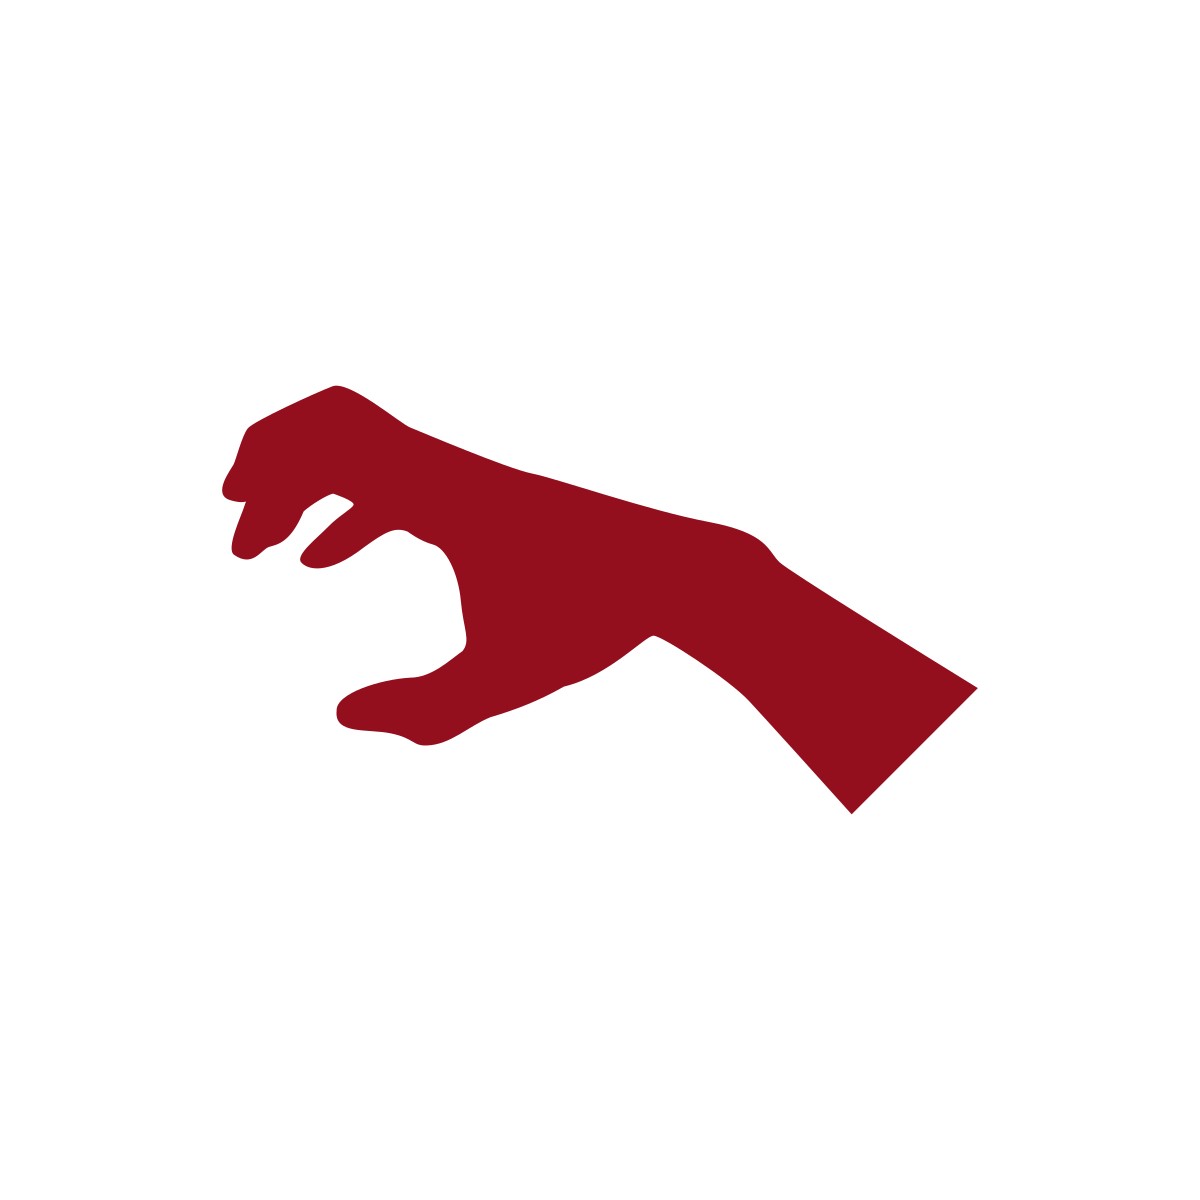 burgundy hand in an overreaching position